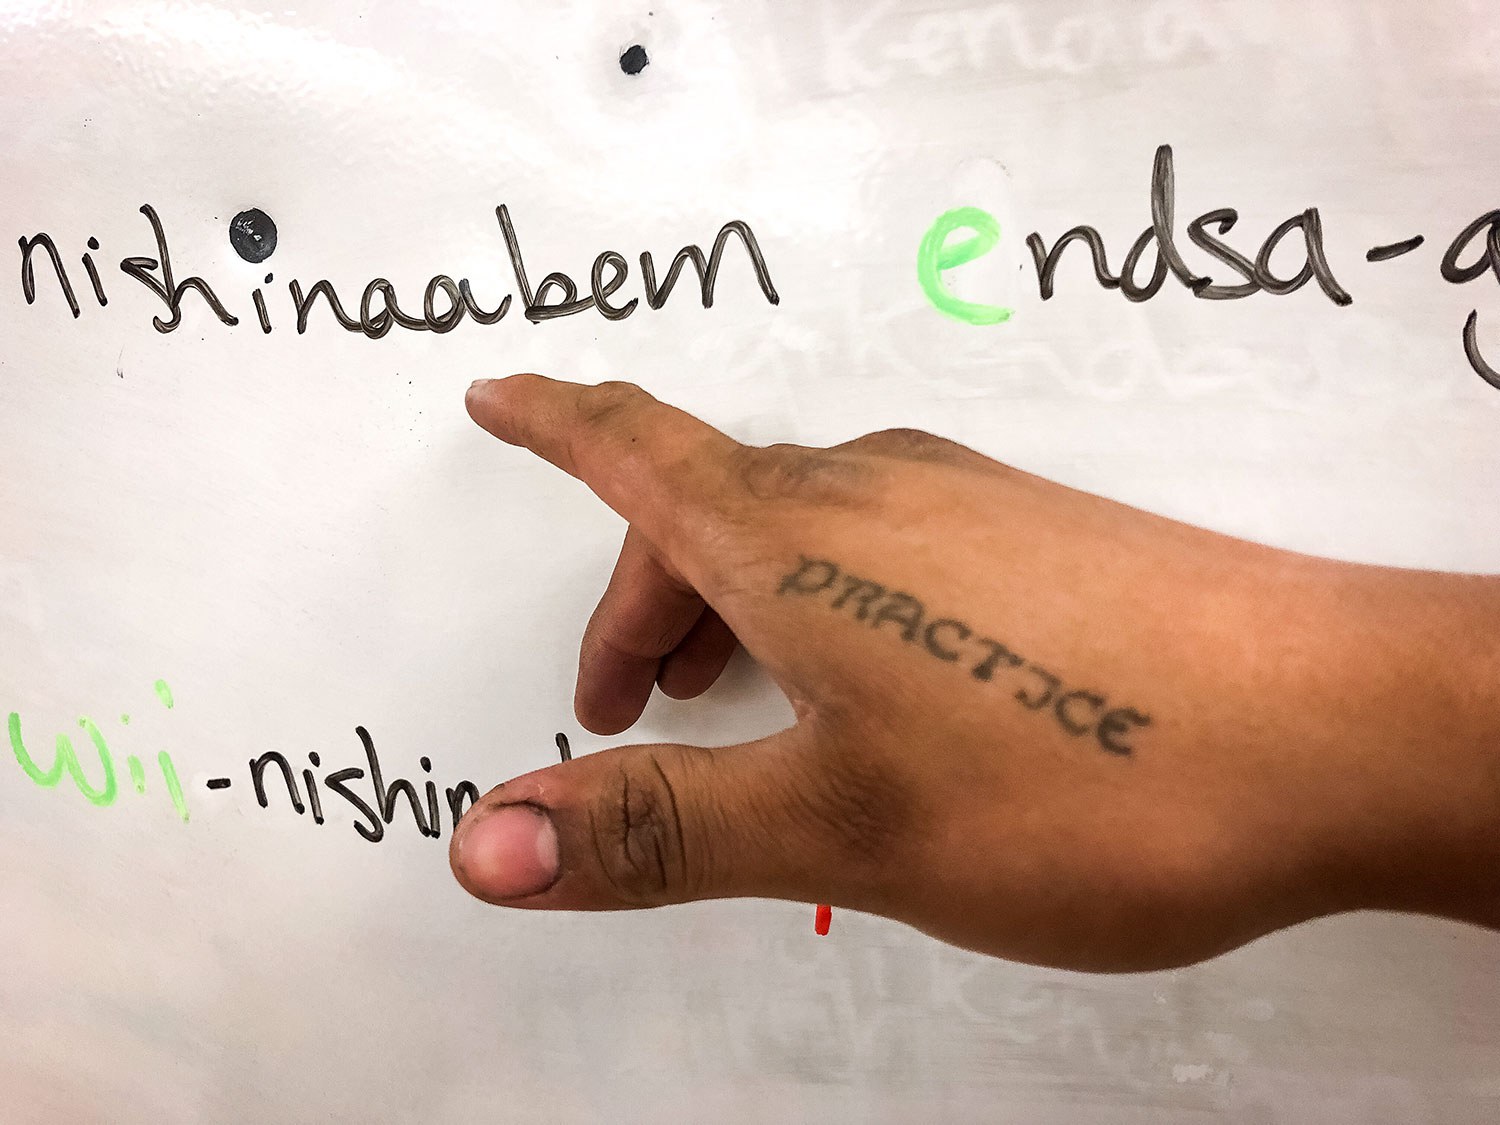 A tattoo on instructor Ninaatig Pangowish’s hand makes for an ever-present reminder for ‘practice’ in speaking the language.